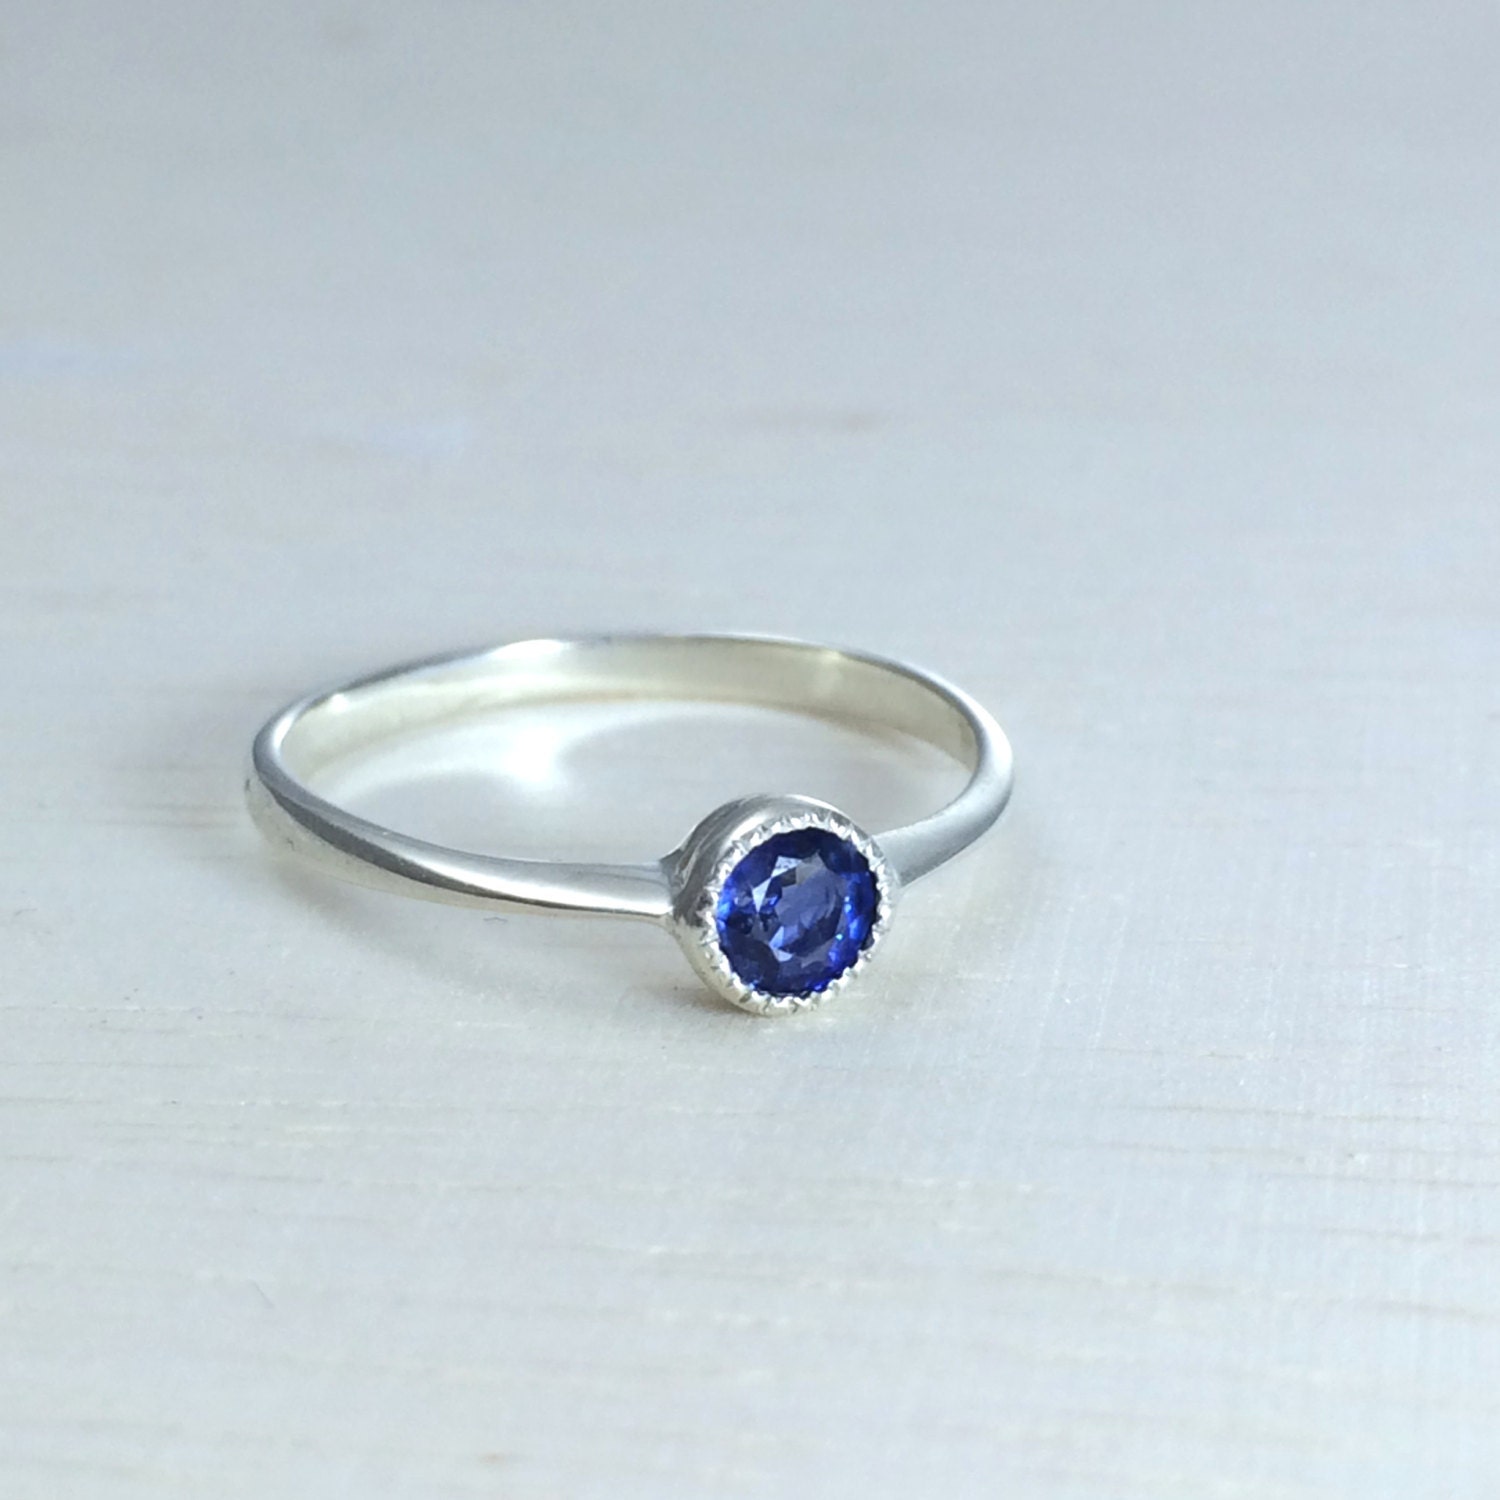 Minimalist engagement ring Solitaire sapphire engagement ring